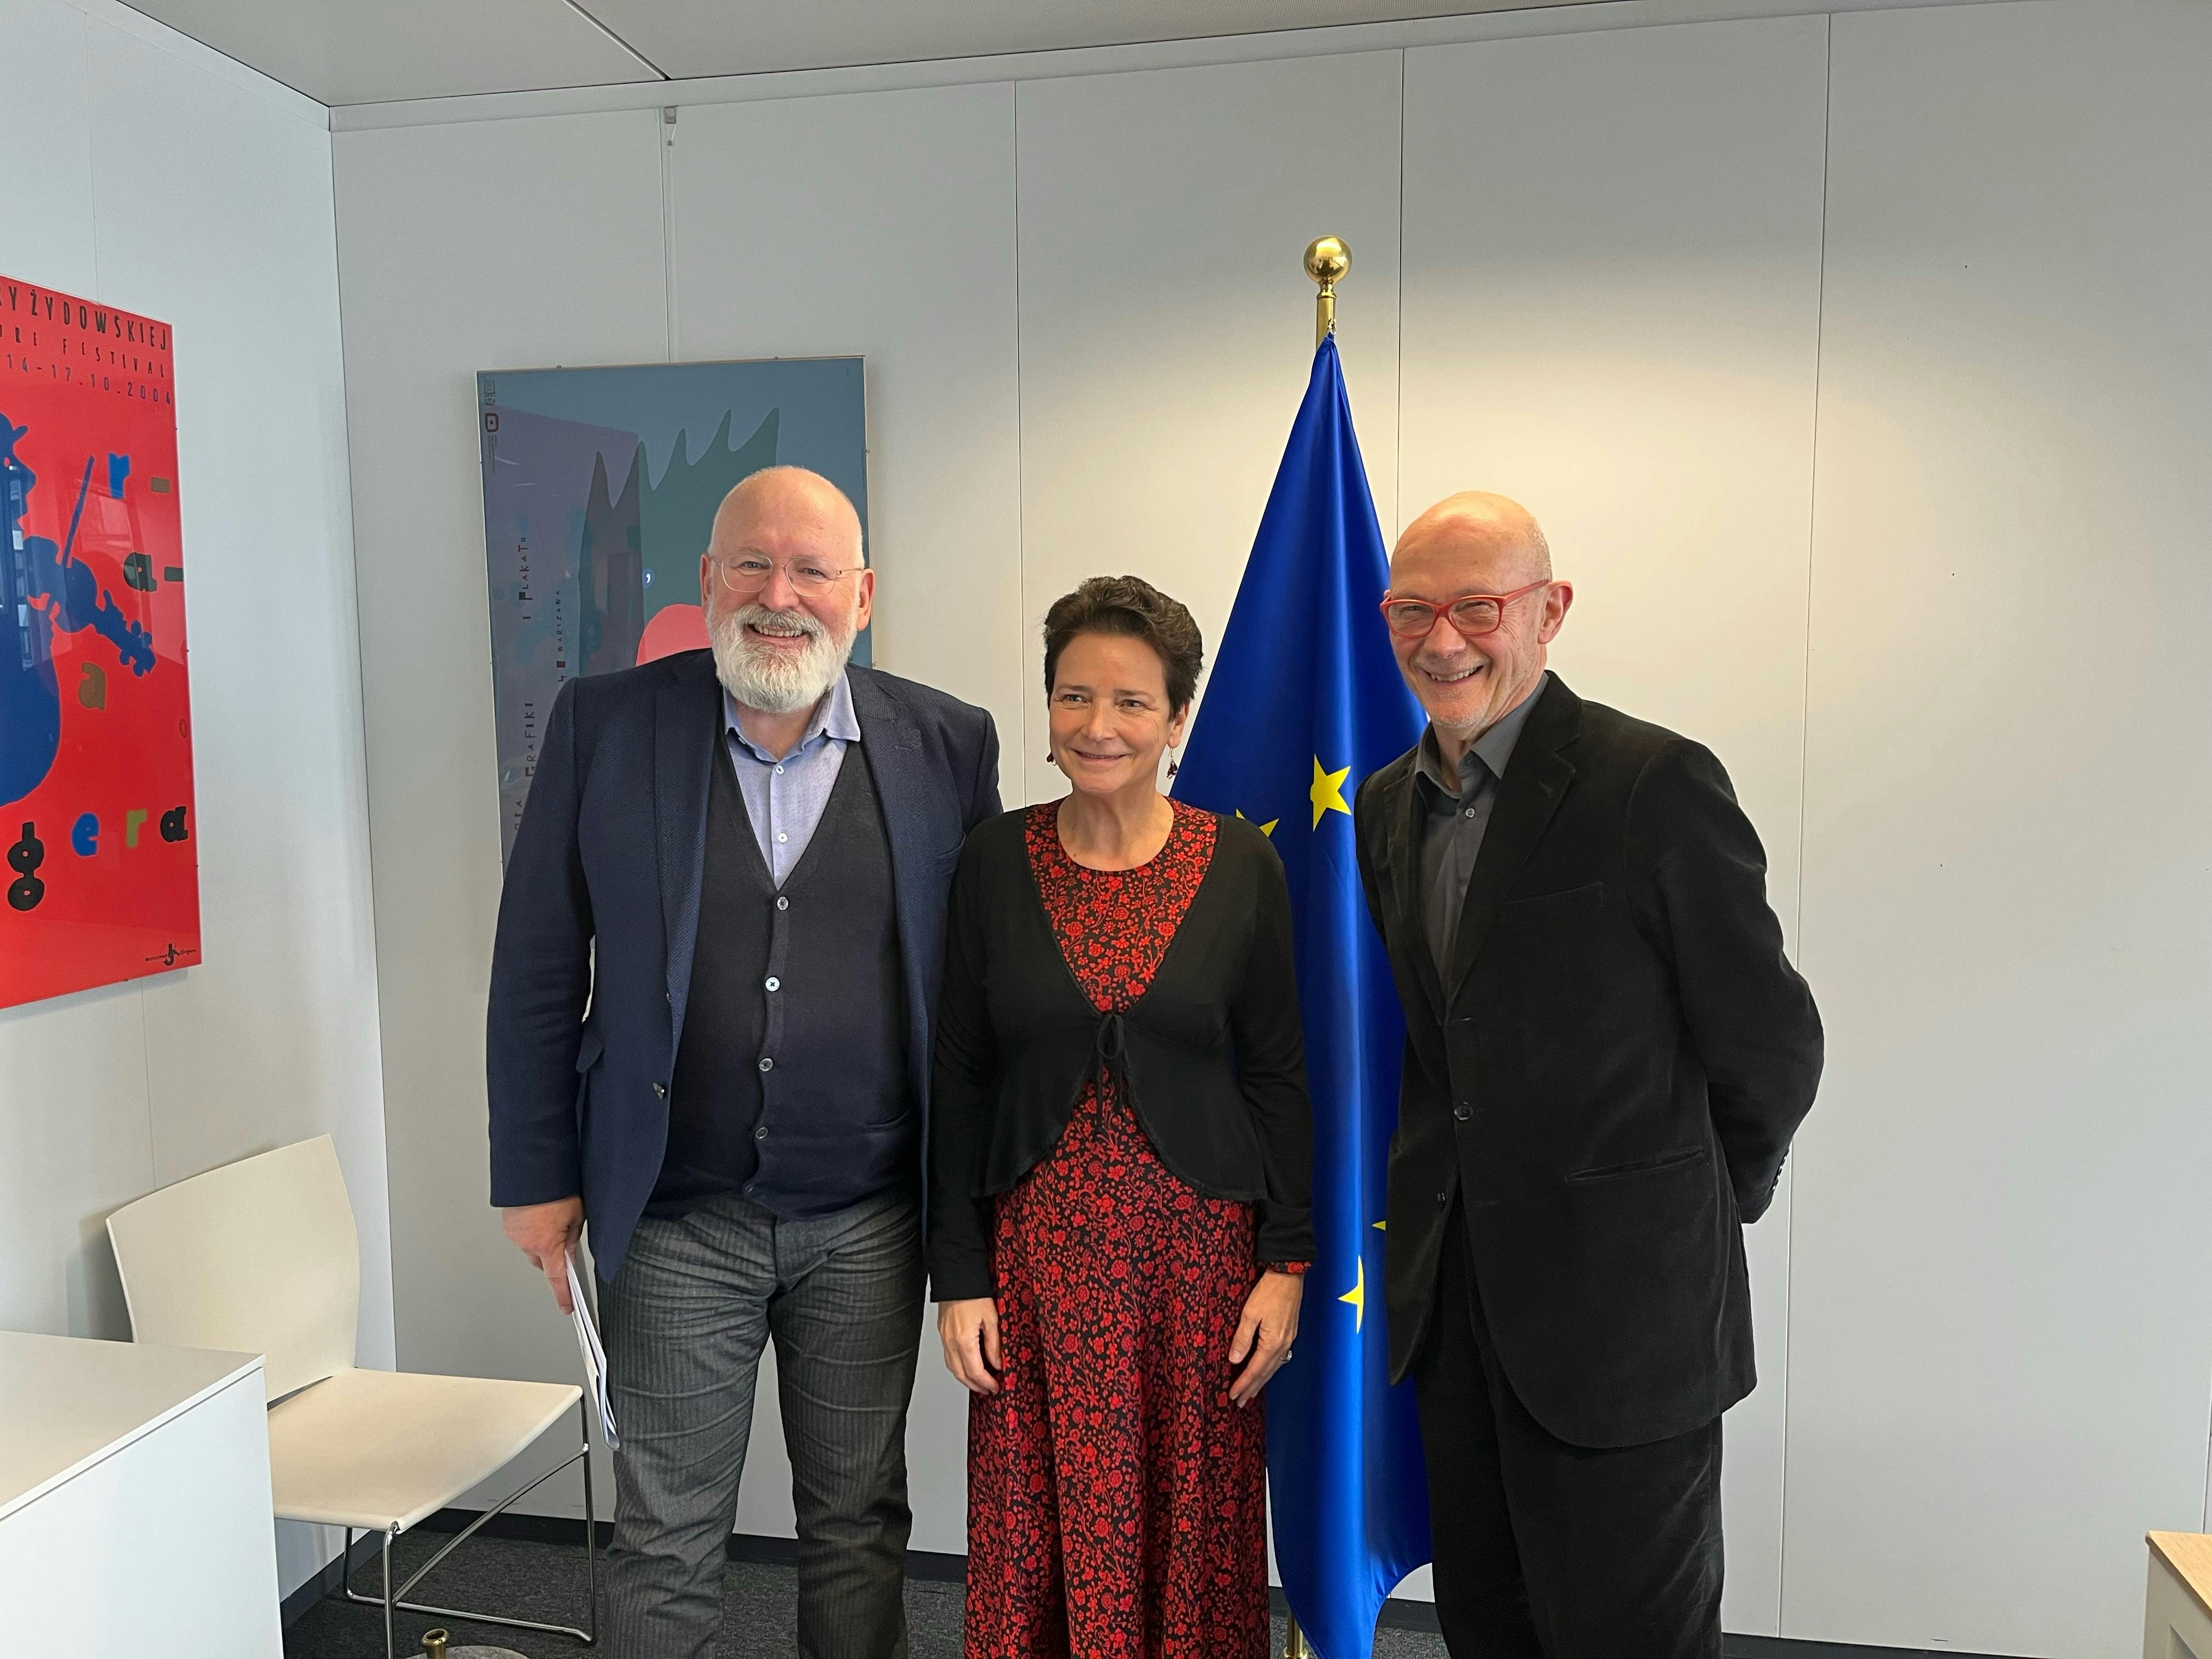 Meeting with Frans Timmermans